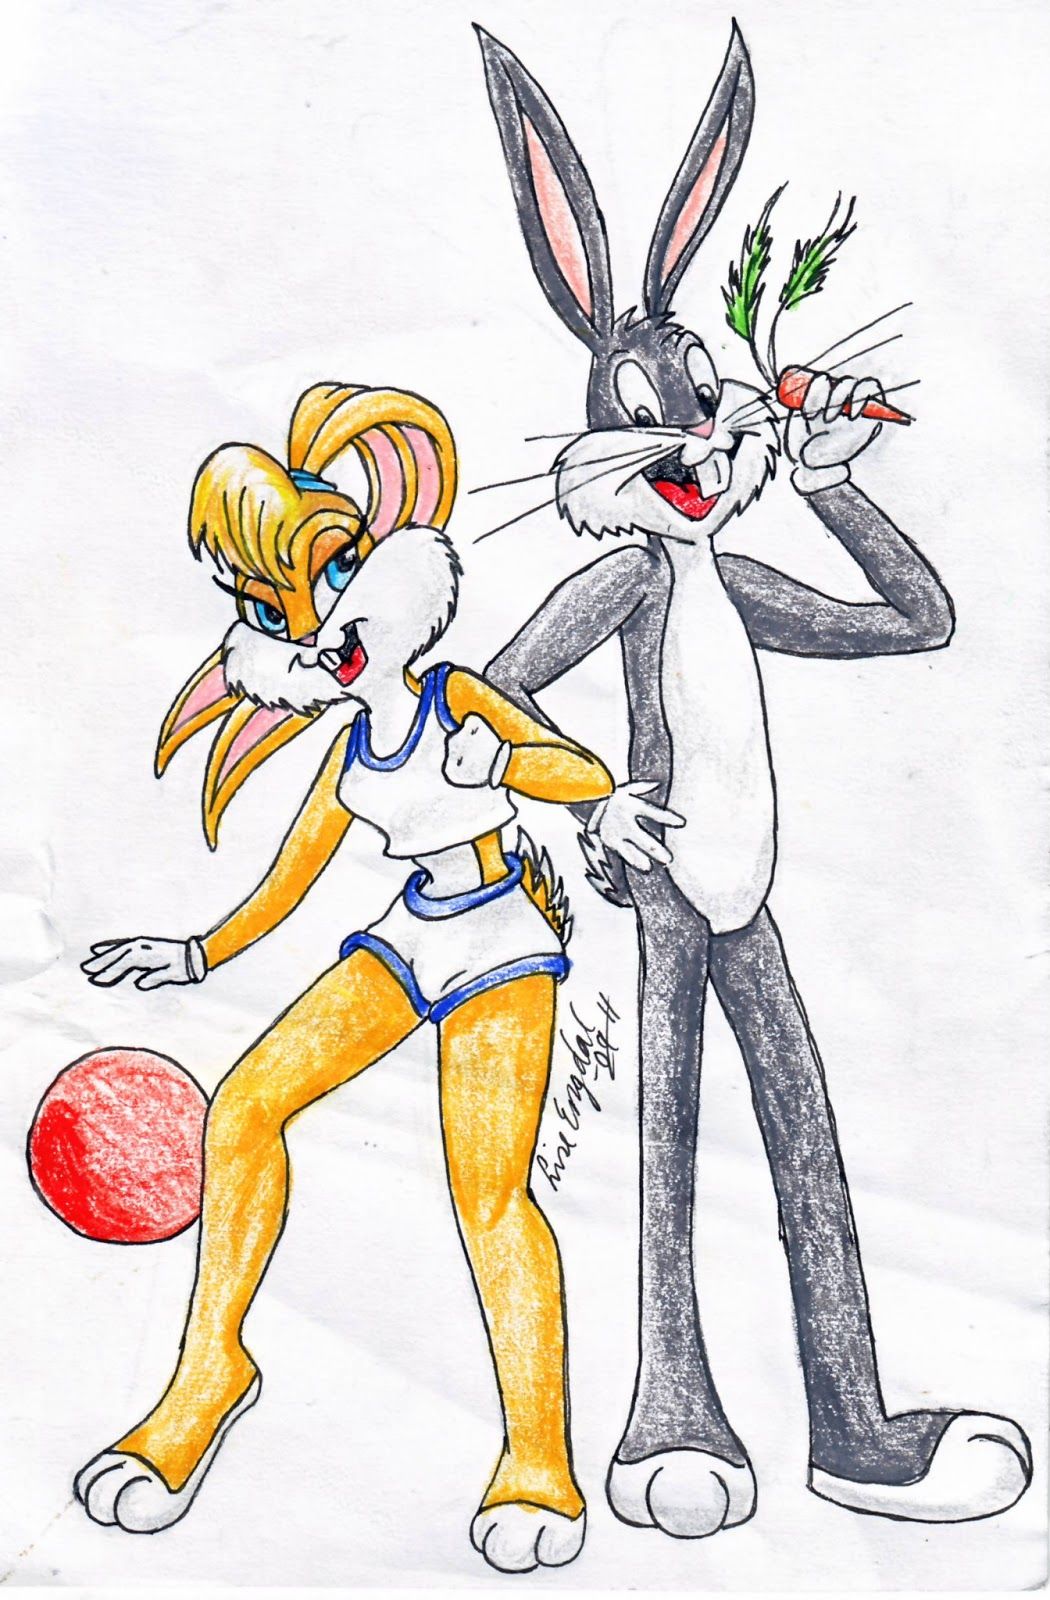 Lola and Bugs Bunny HD Image Wallpaper for iPhone - Cartoons ...